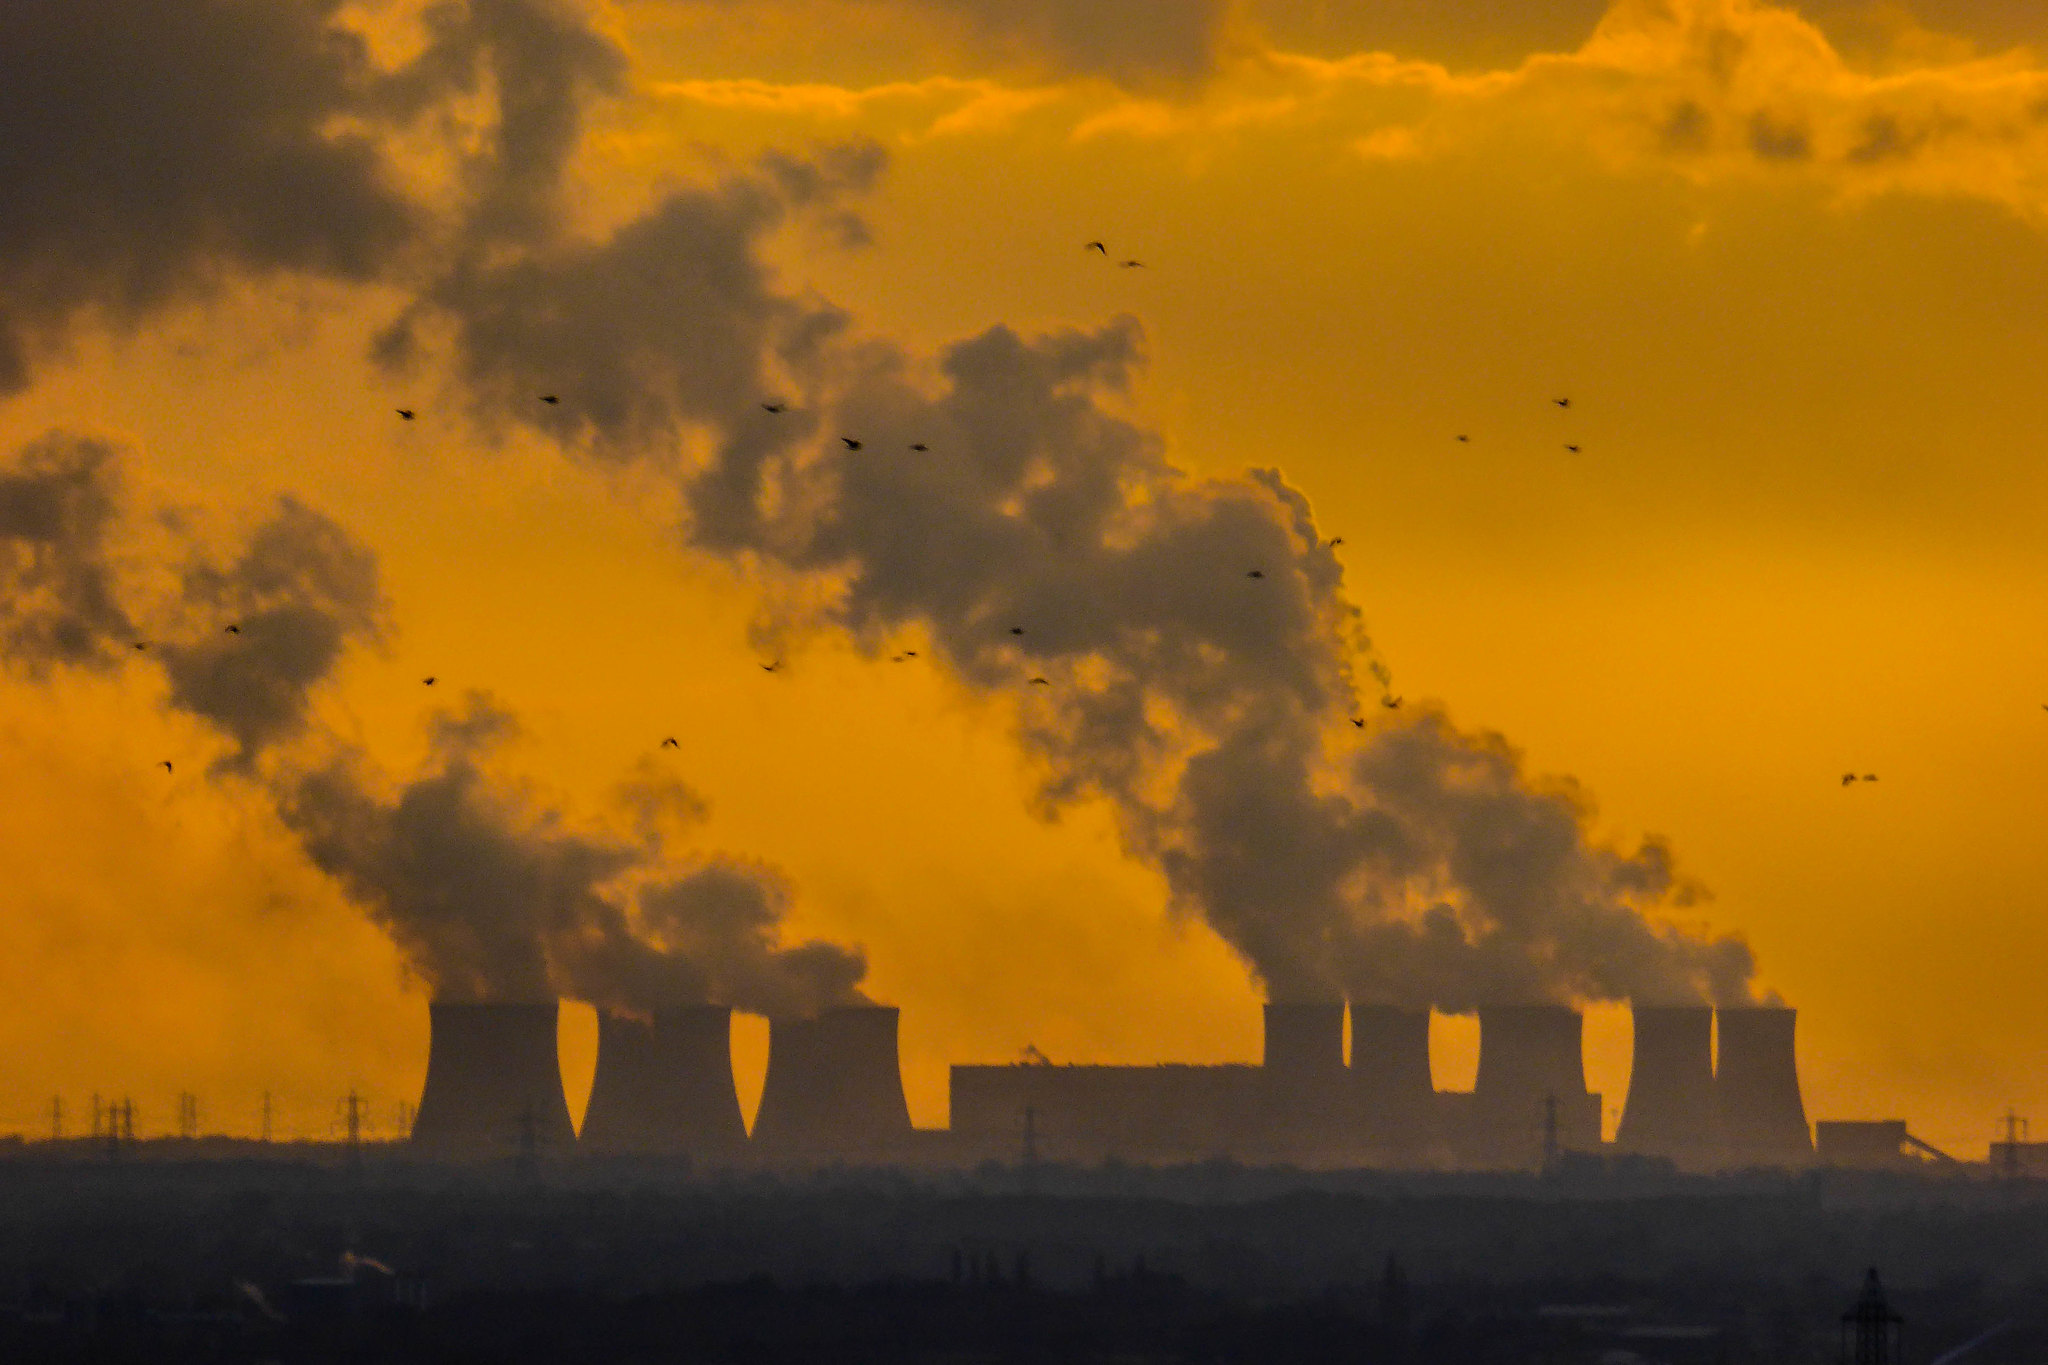 Drax power station. Photo by Peter Richman/Flickr